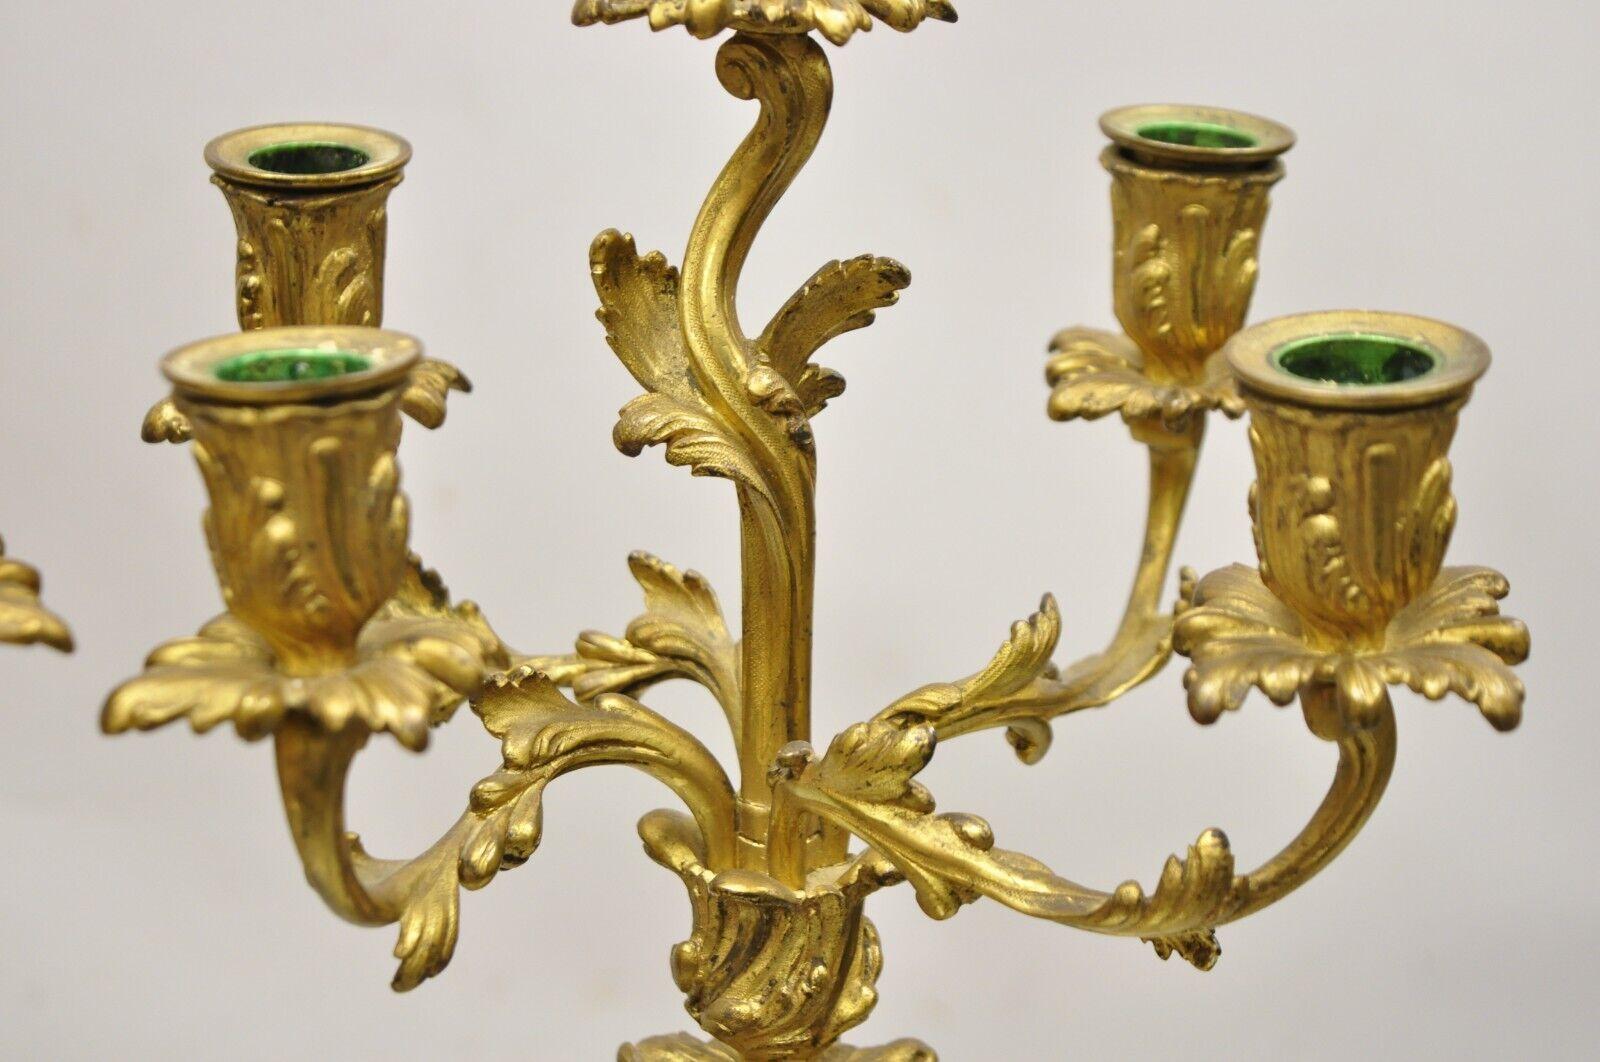 20th Century Antique French Louis XV Rococo Style Gold Gilt Bronze Candelabras, a Pair For Sale